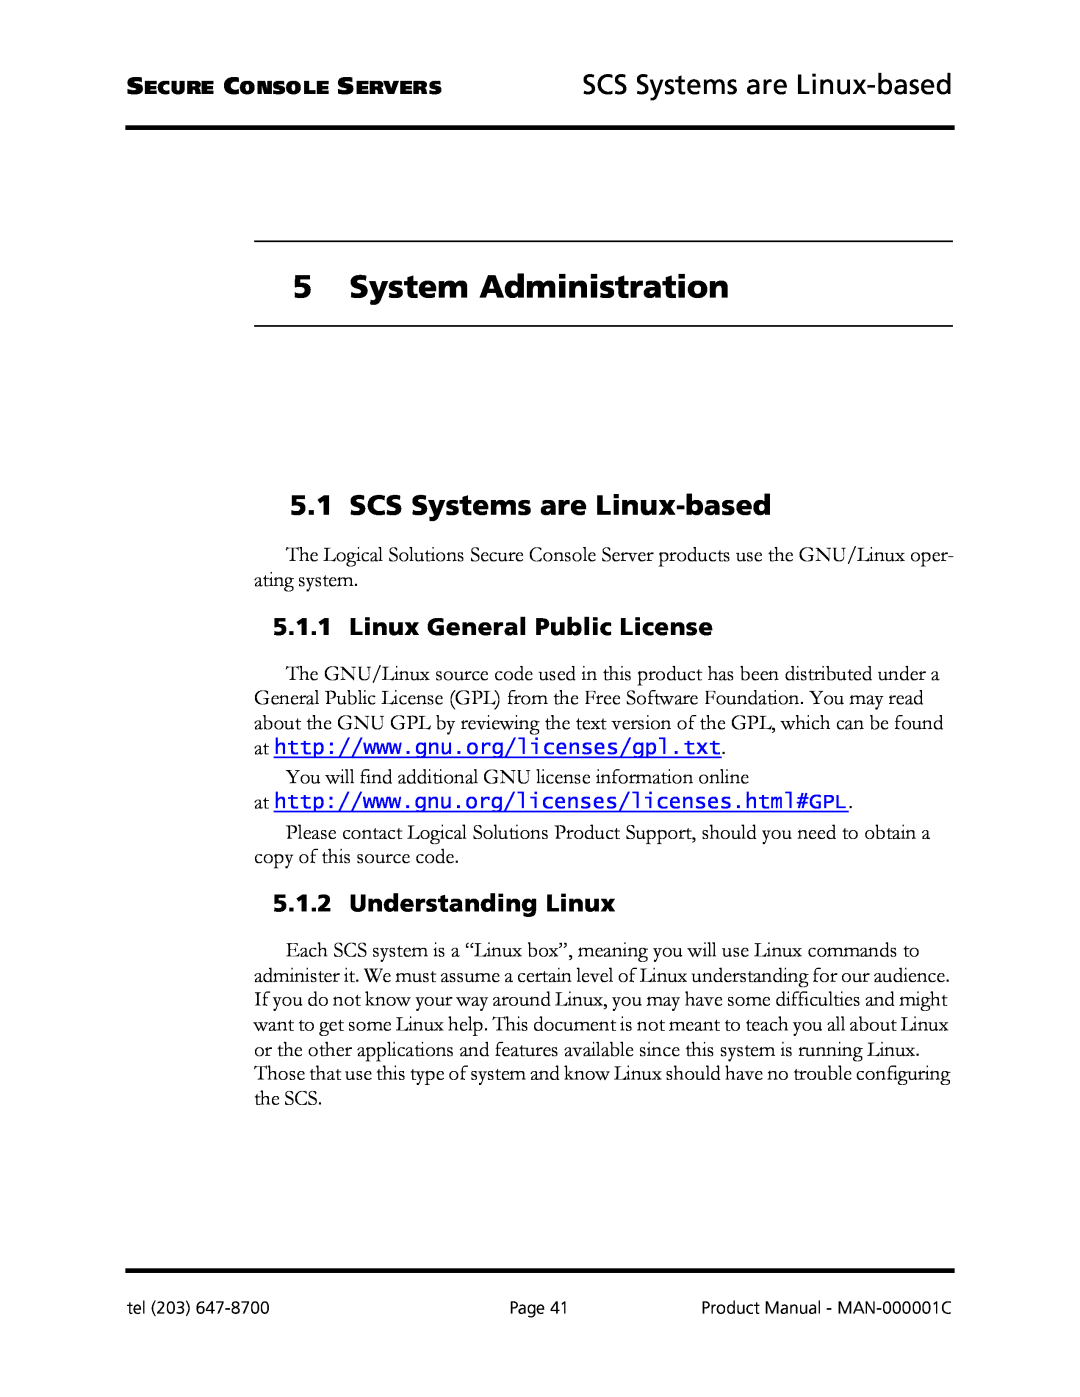 Logical Solutions System Administration, SCS Systems are Linux-based, Linux General Public License, Understanding Linux 